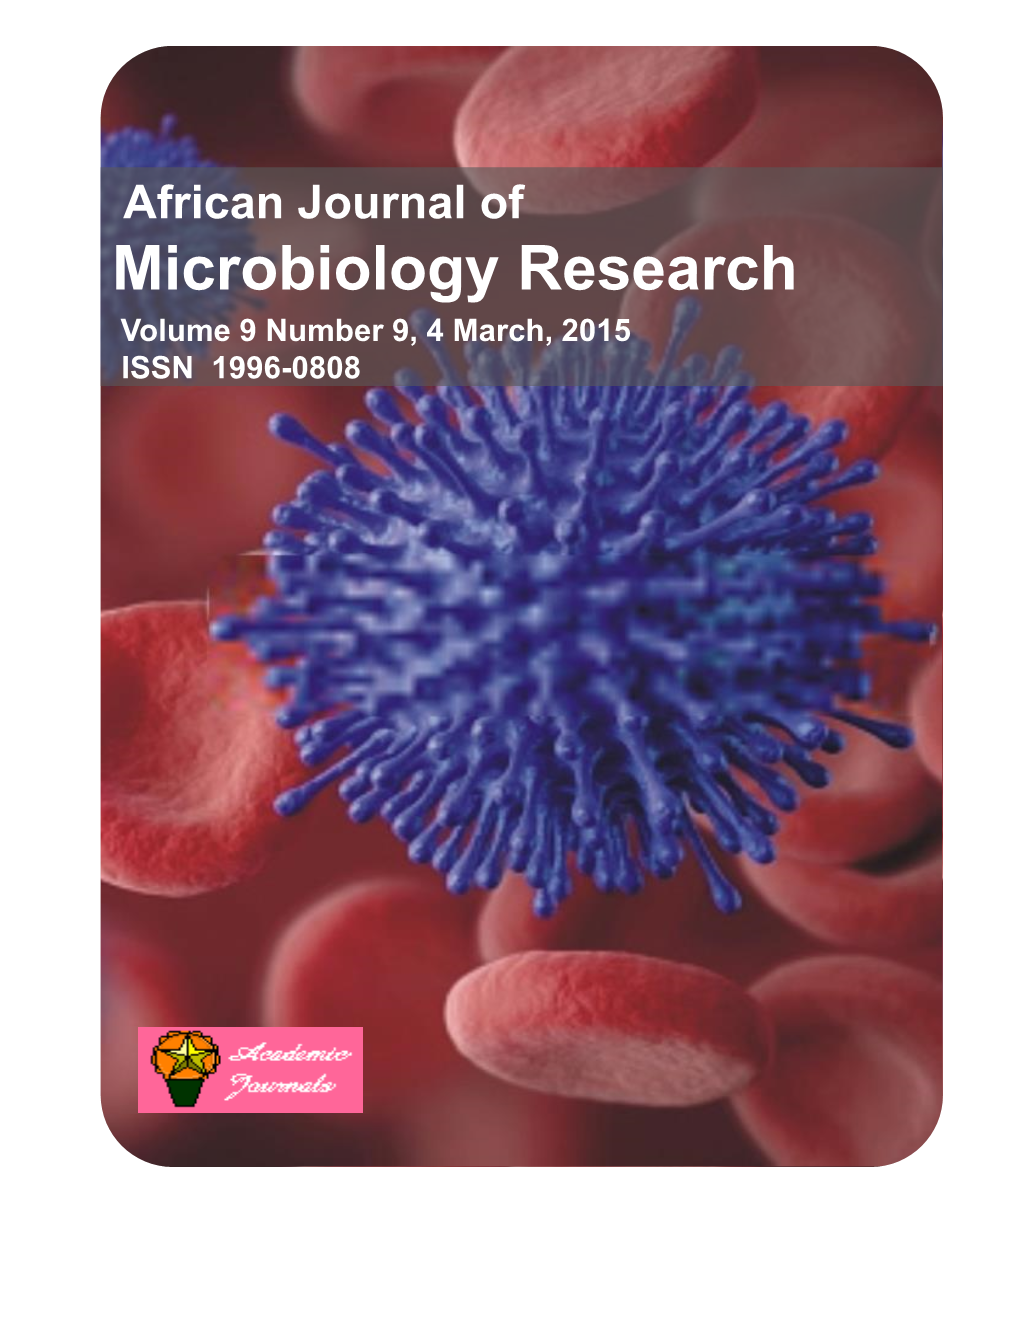 Microbiology Research Volume 9 Number 9, 4 March, 2015 ISSN 1996-0808